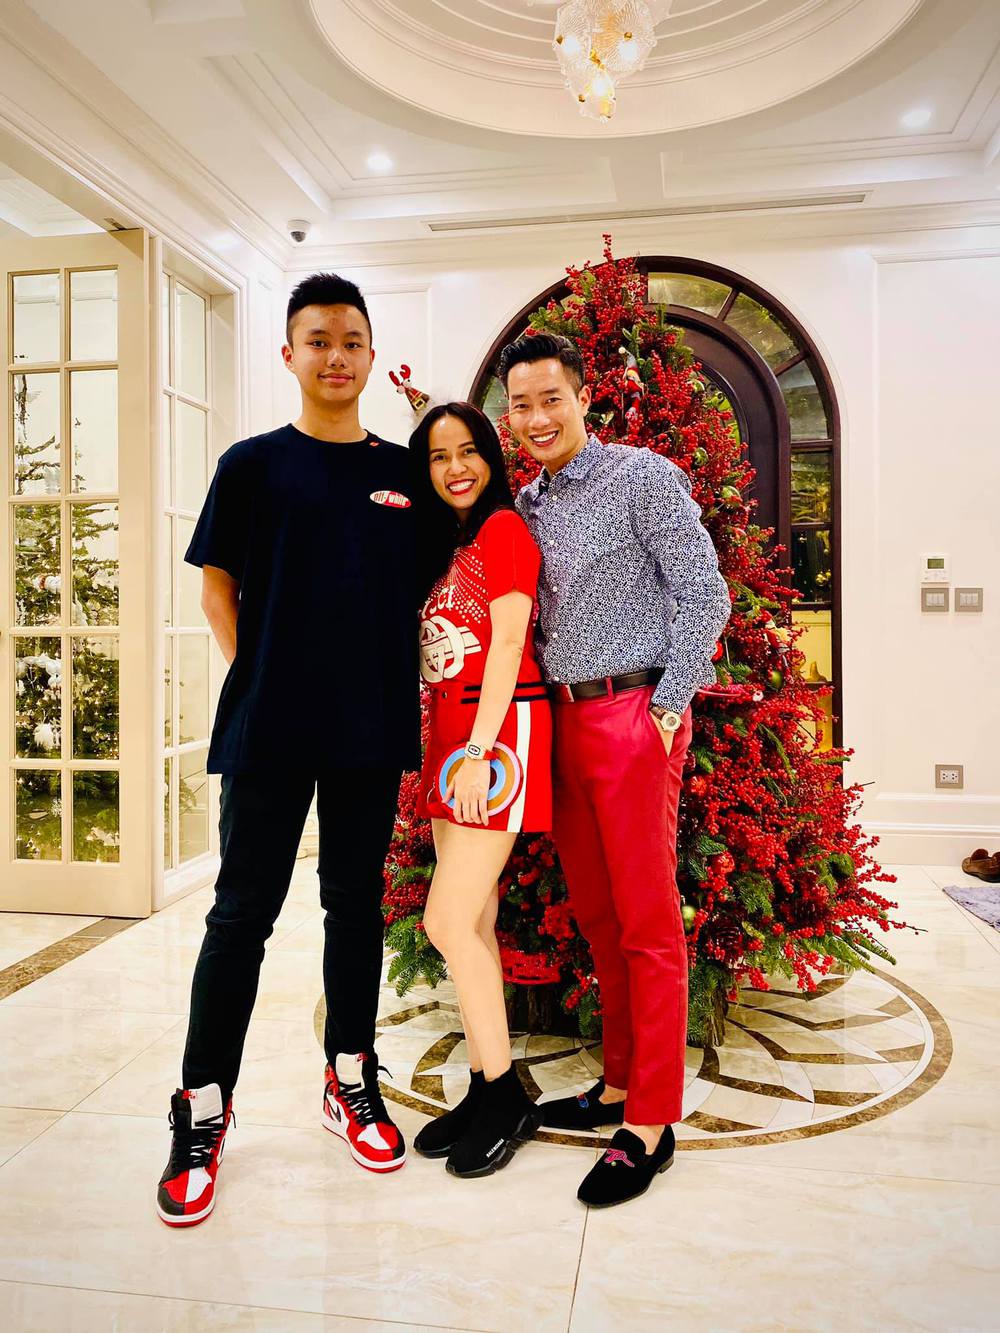 BTV Hoa Thanh Tung: Becoming a boss at VTV, his wife is getting younger and prettier, and his son is nearly 1m90 tall - Photo 9.